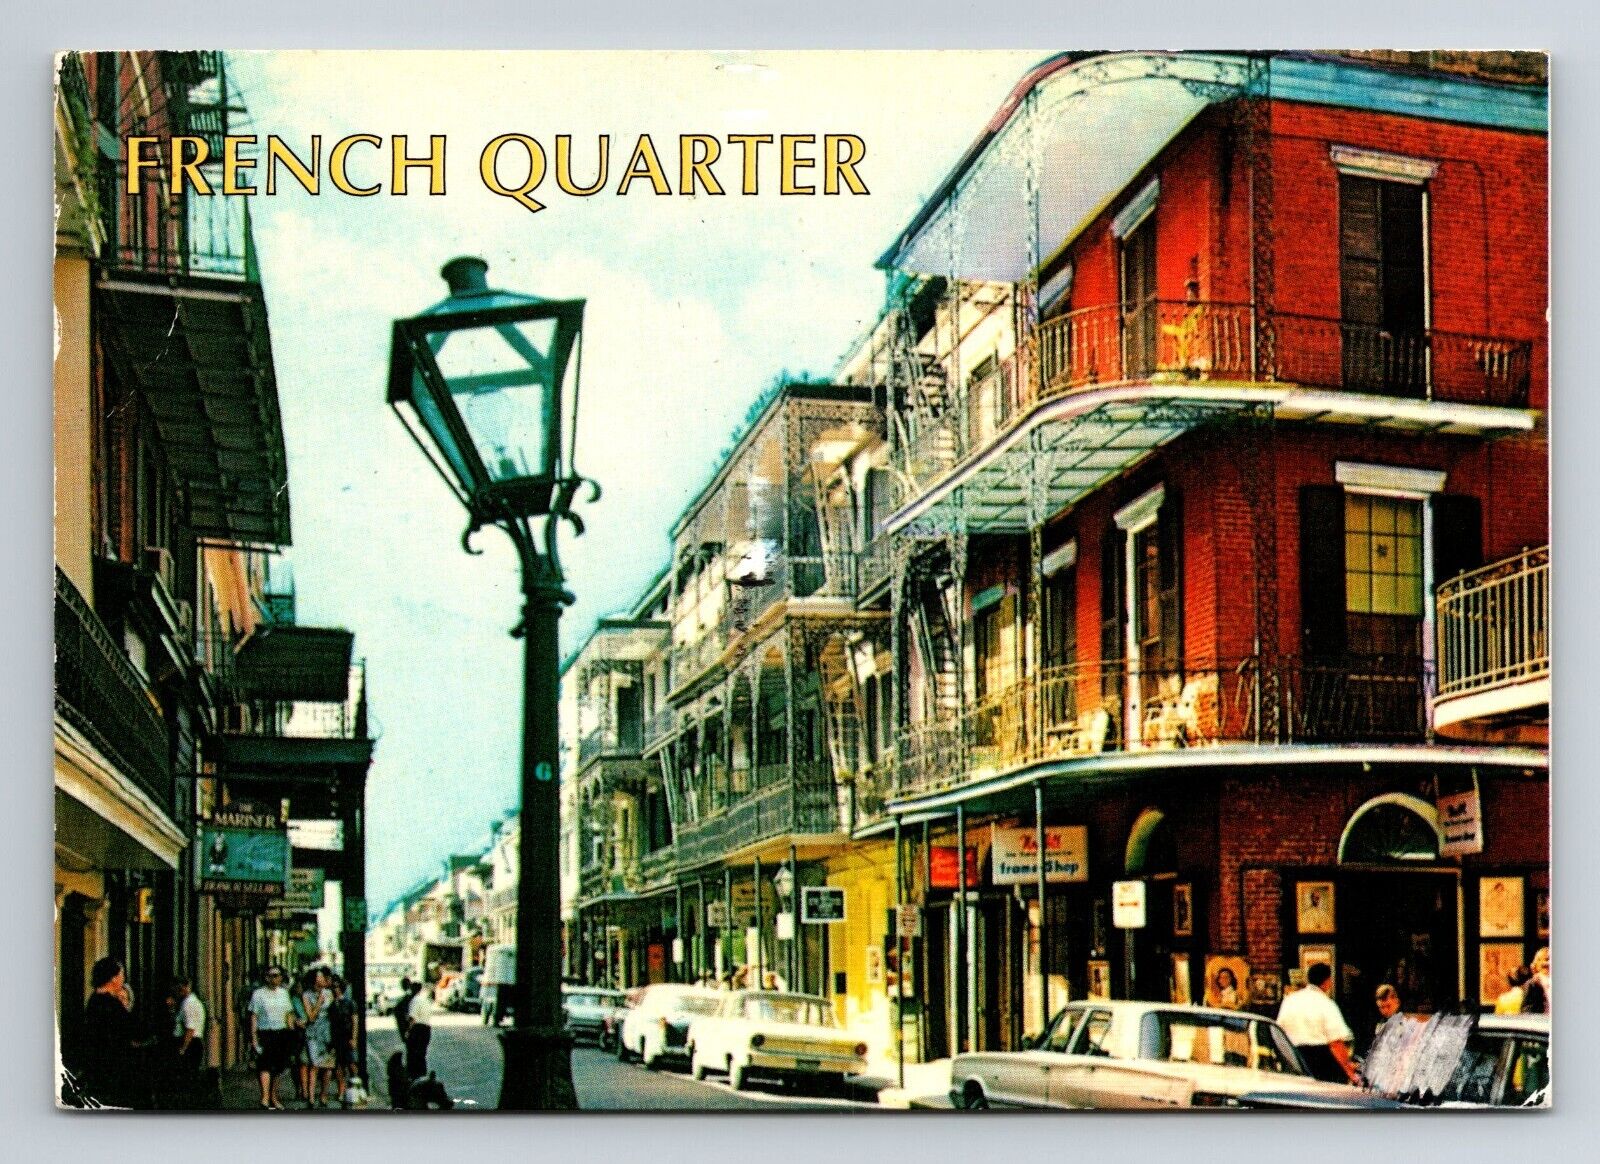 Vintage post card 5 3/4 x 4 1/8 inch FRENCH QUARTER New Orleans, Louisiana